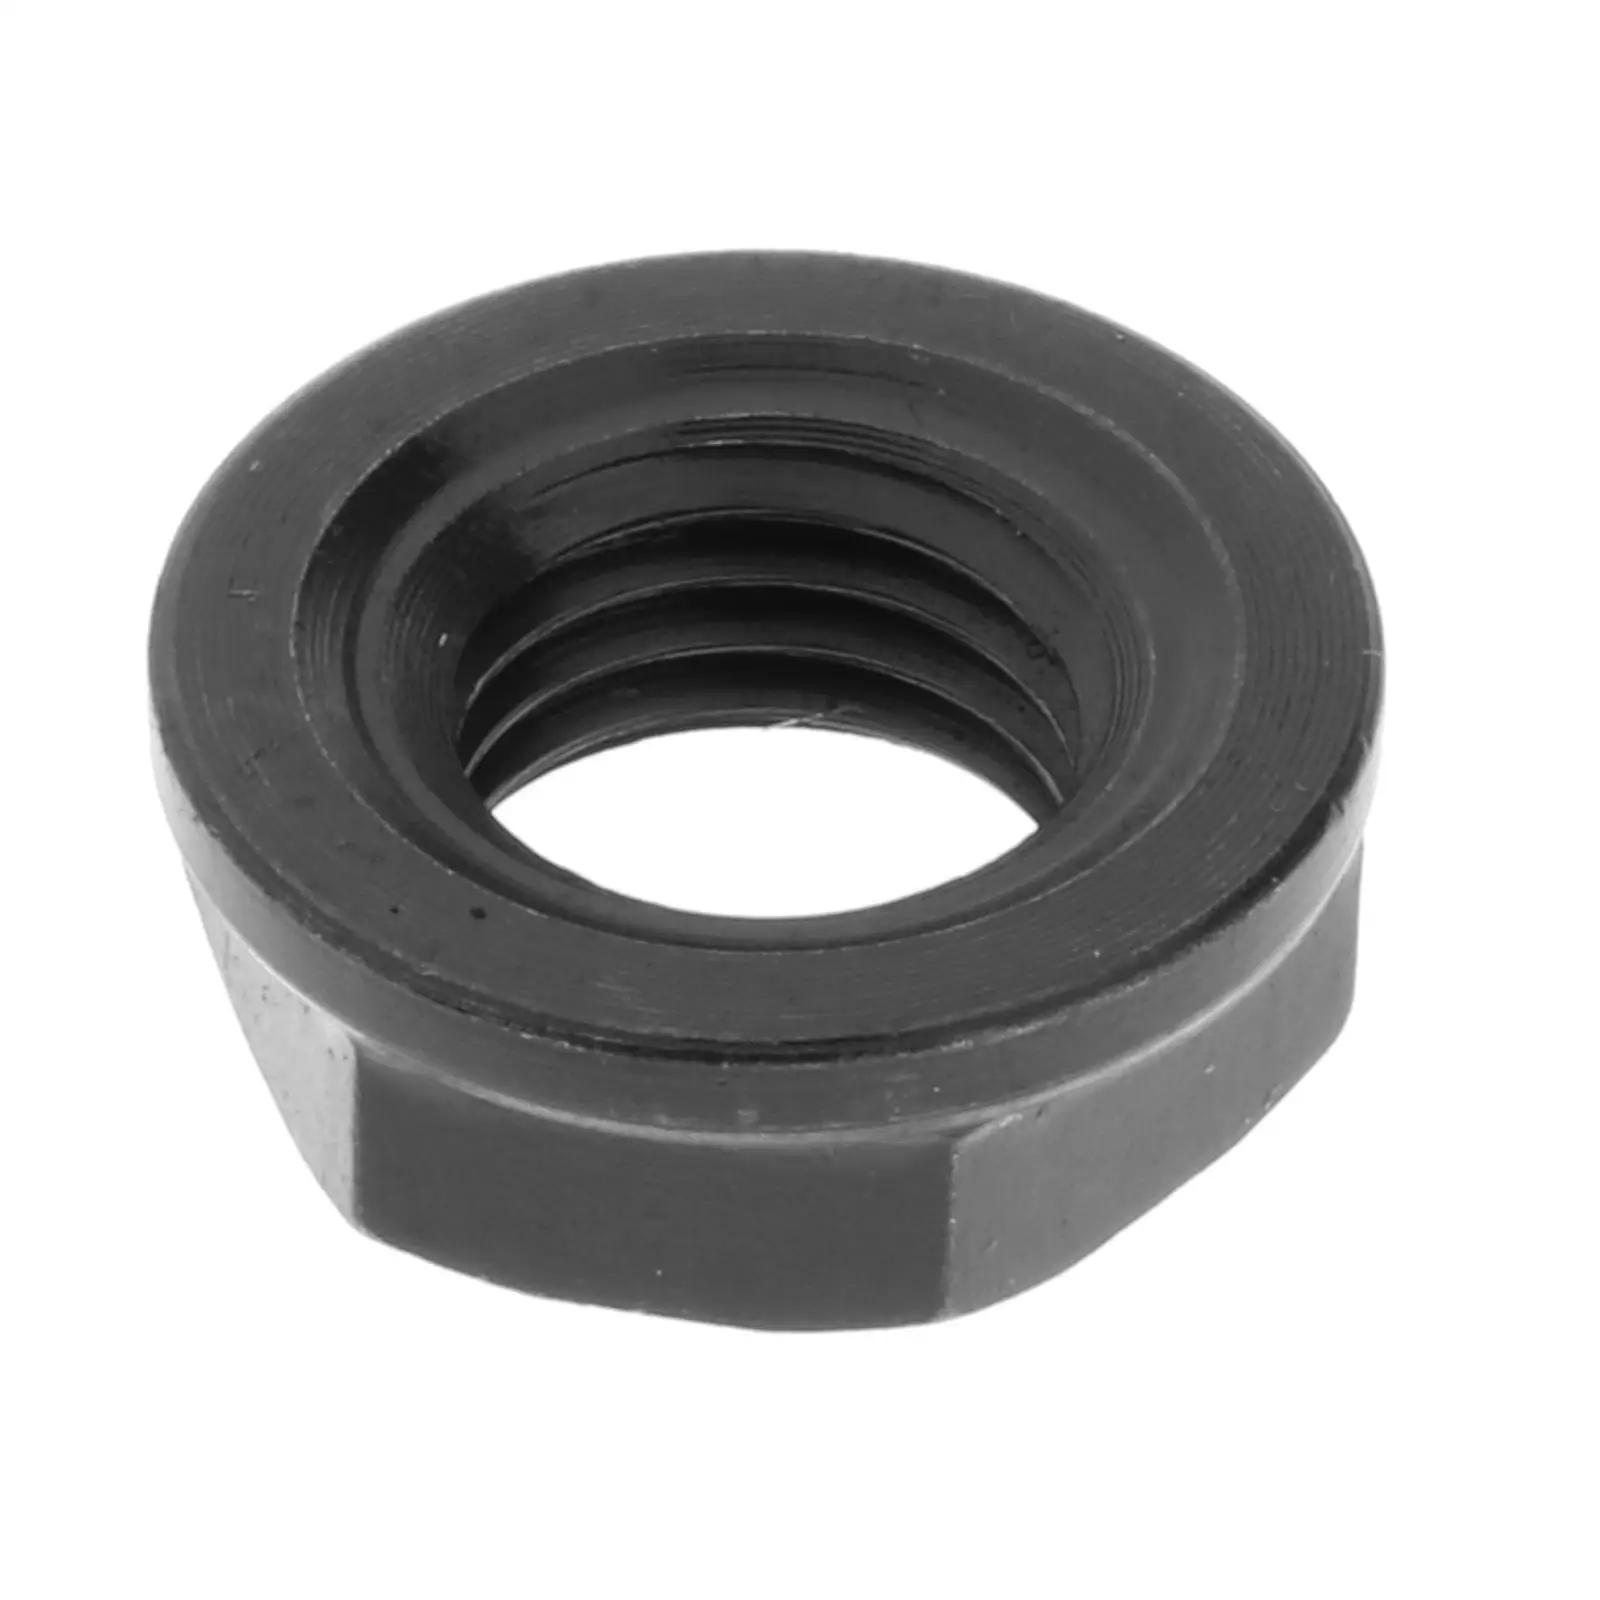 

90179-08M06 Driver Shaft Nut for Yamaha Outboard Parts 8 9.9 15 20HP Parsun Hidea Motocycle Accessory Replacements